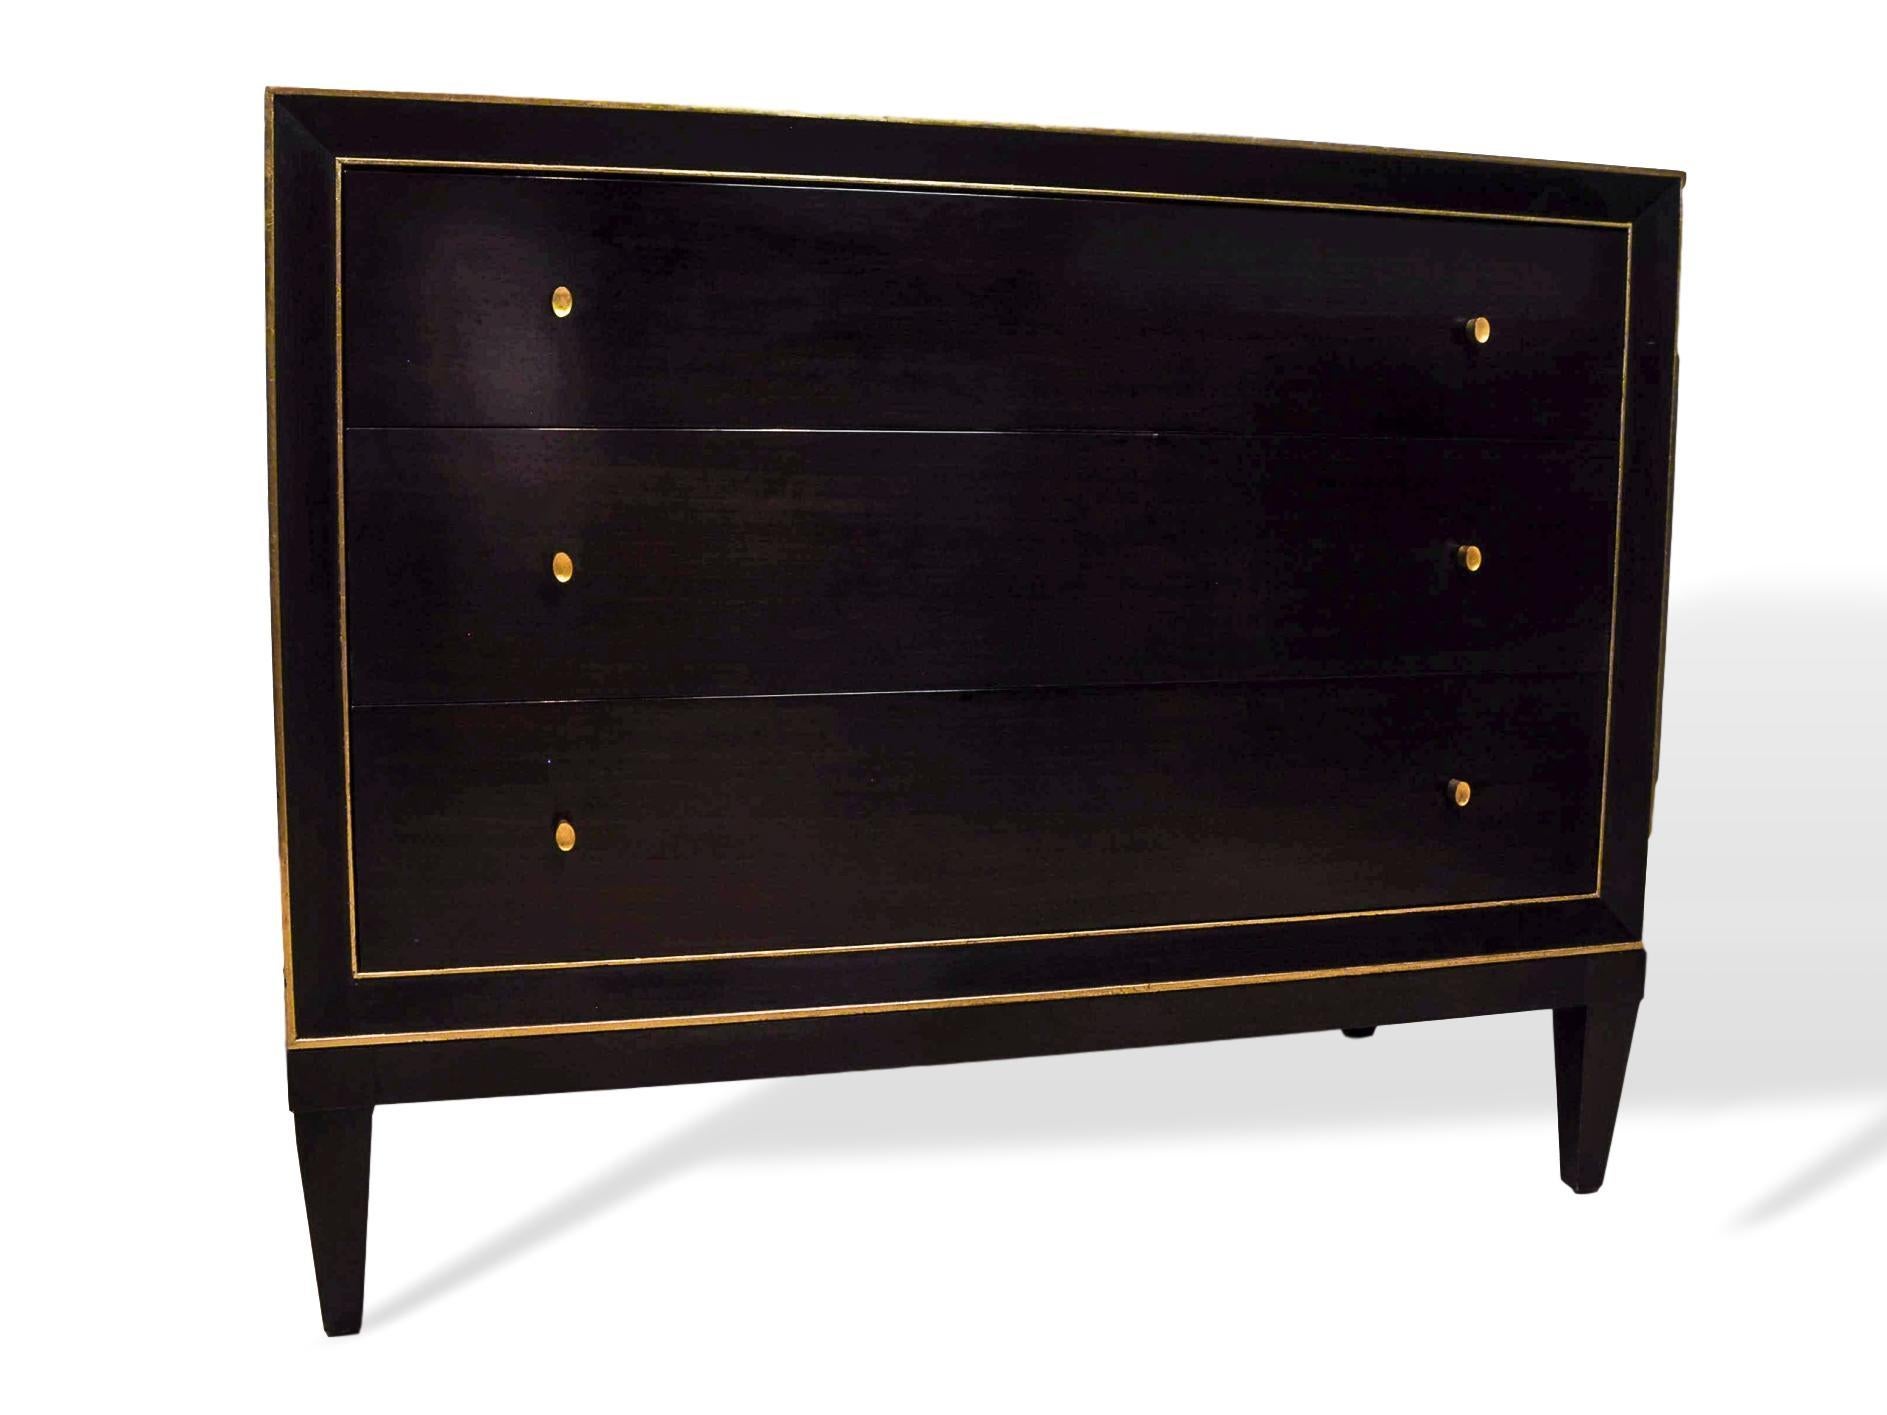 Barbara Barry for Baker furniture ebonized mahogany three-drawer commode, with gilded bandings, gold finished pulls, with soft-close drawers; signed with metal plates to interior top drawer, for Baker Furniture and another for The Barbara Barry